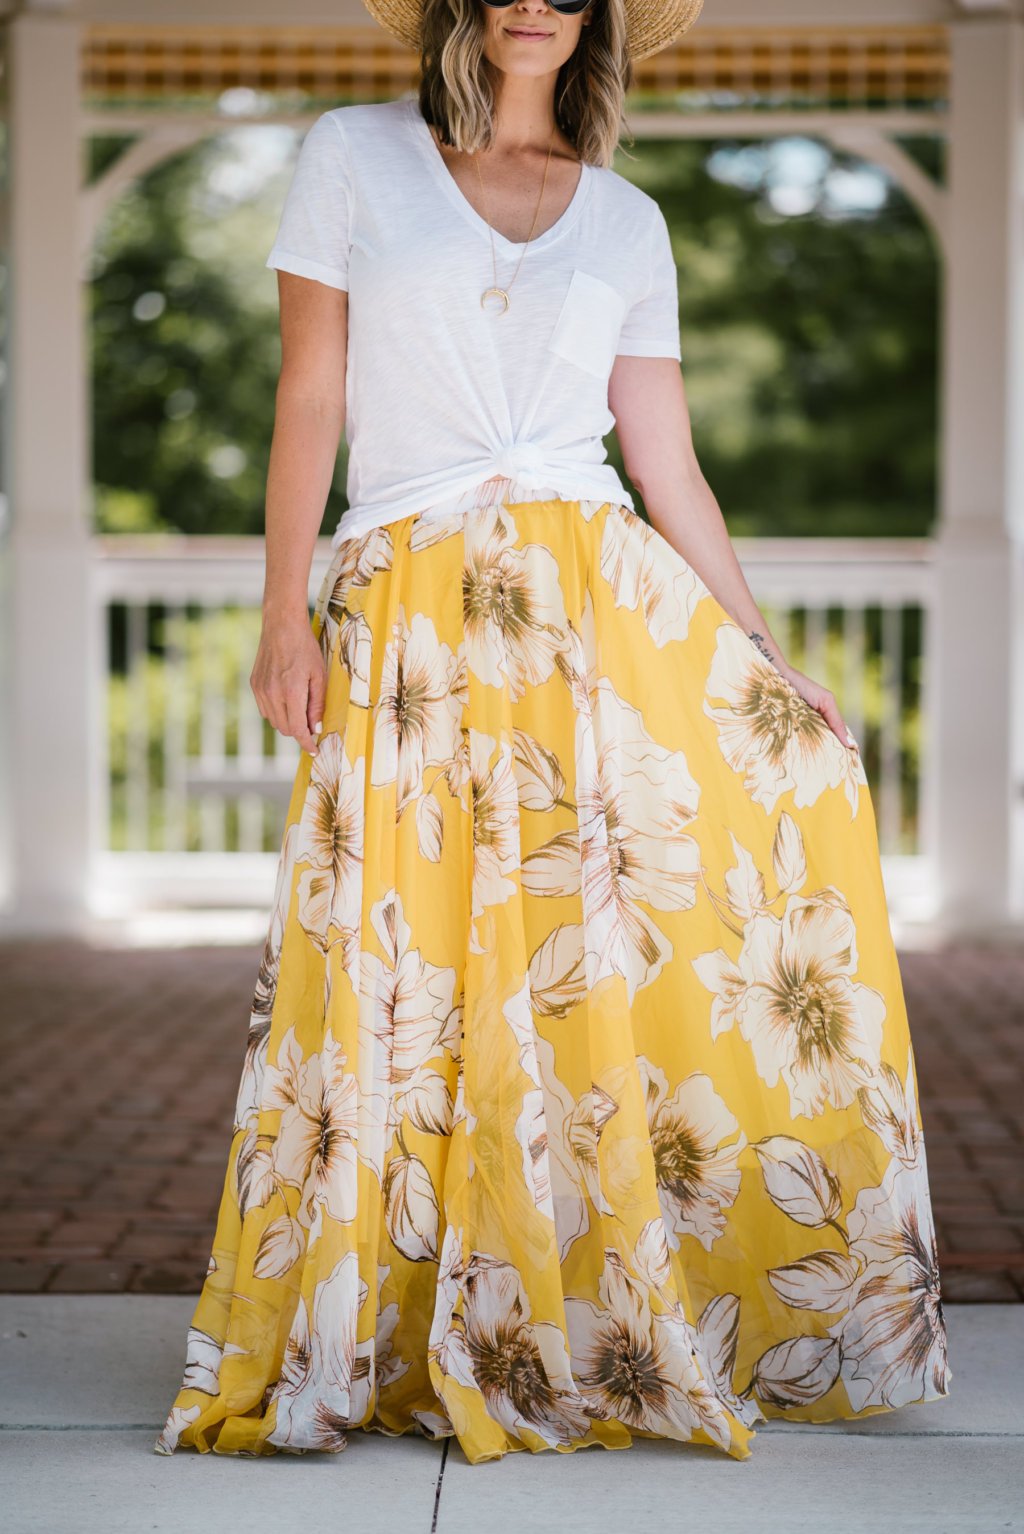 Summer style: floral maxi skirt, white tee, straw hat, sunglasses, sandals